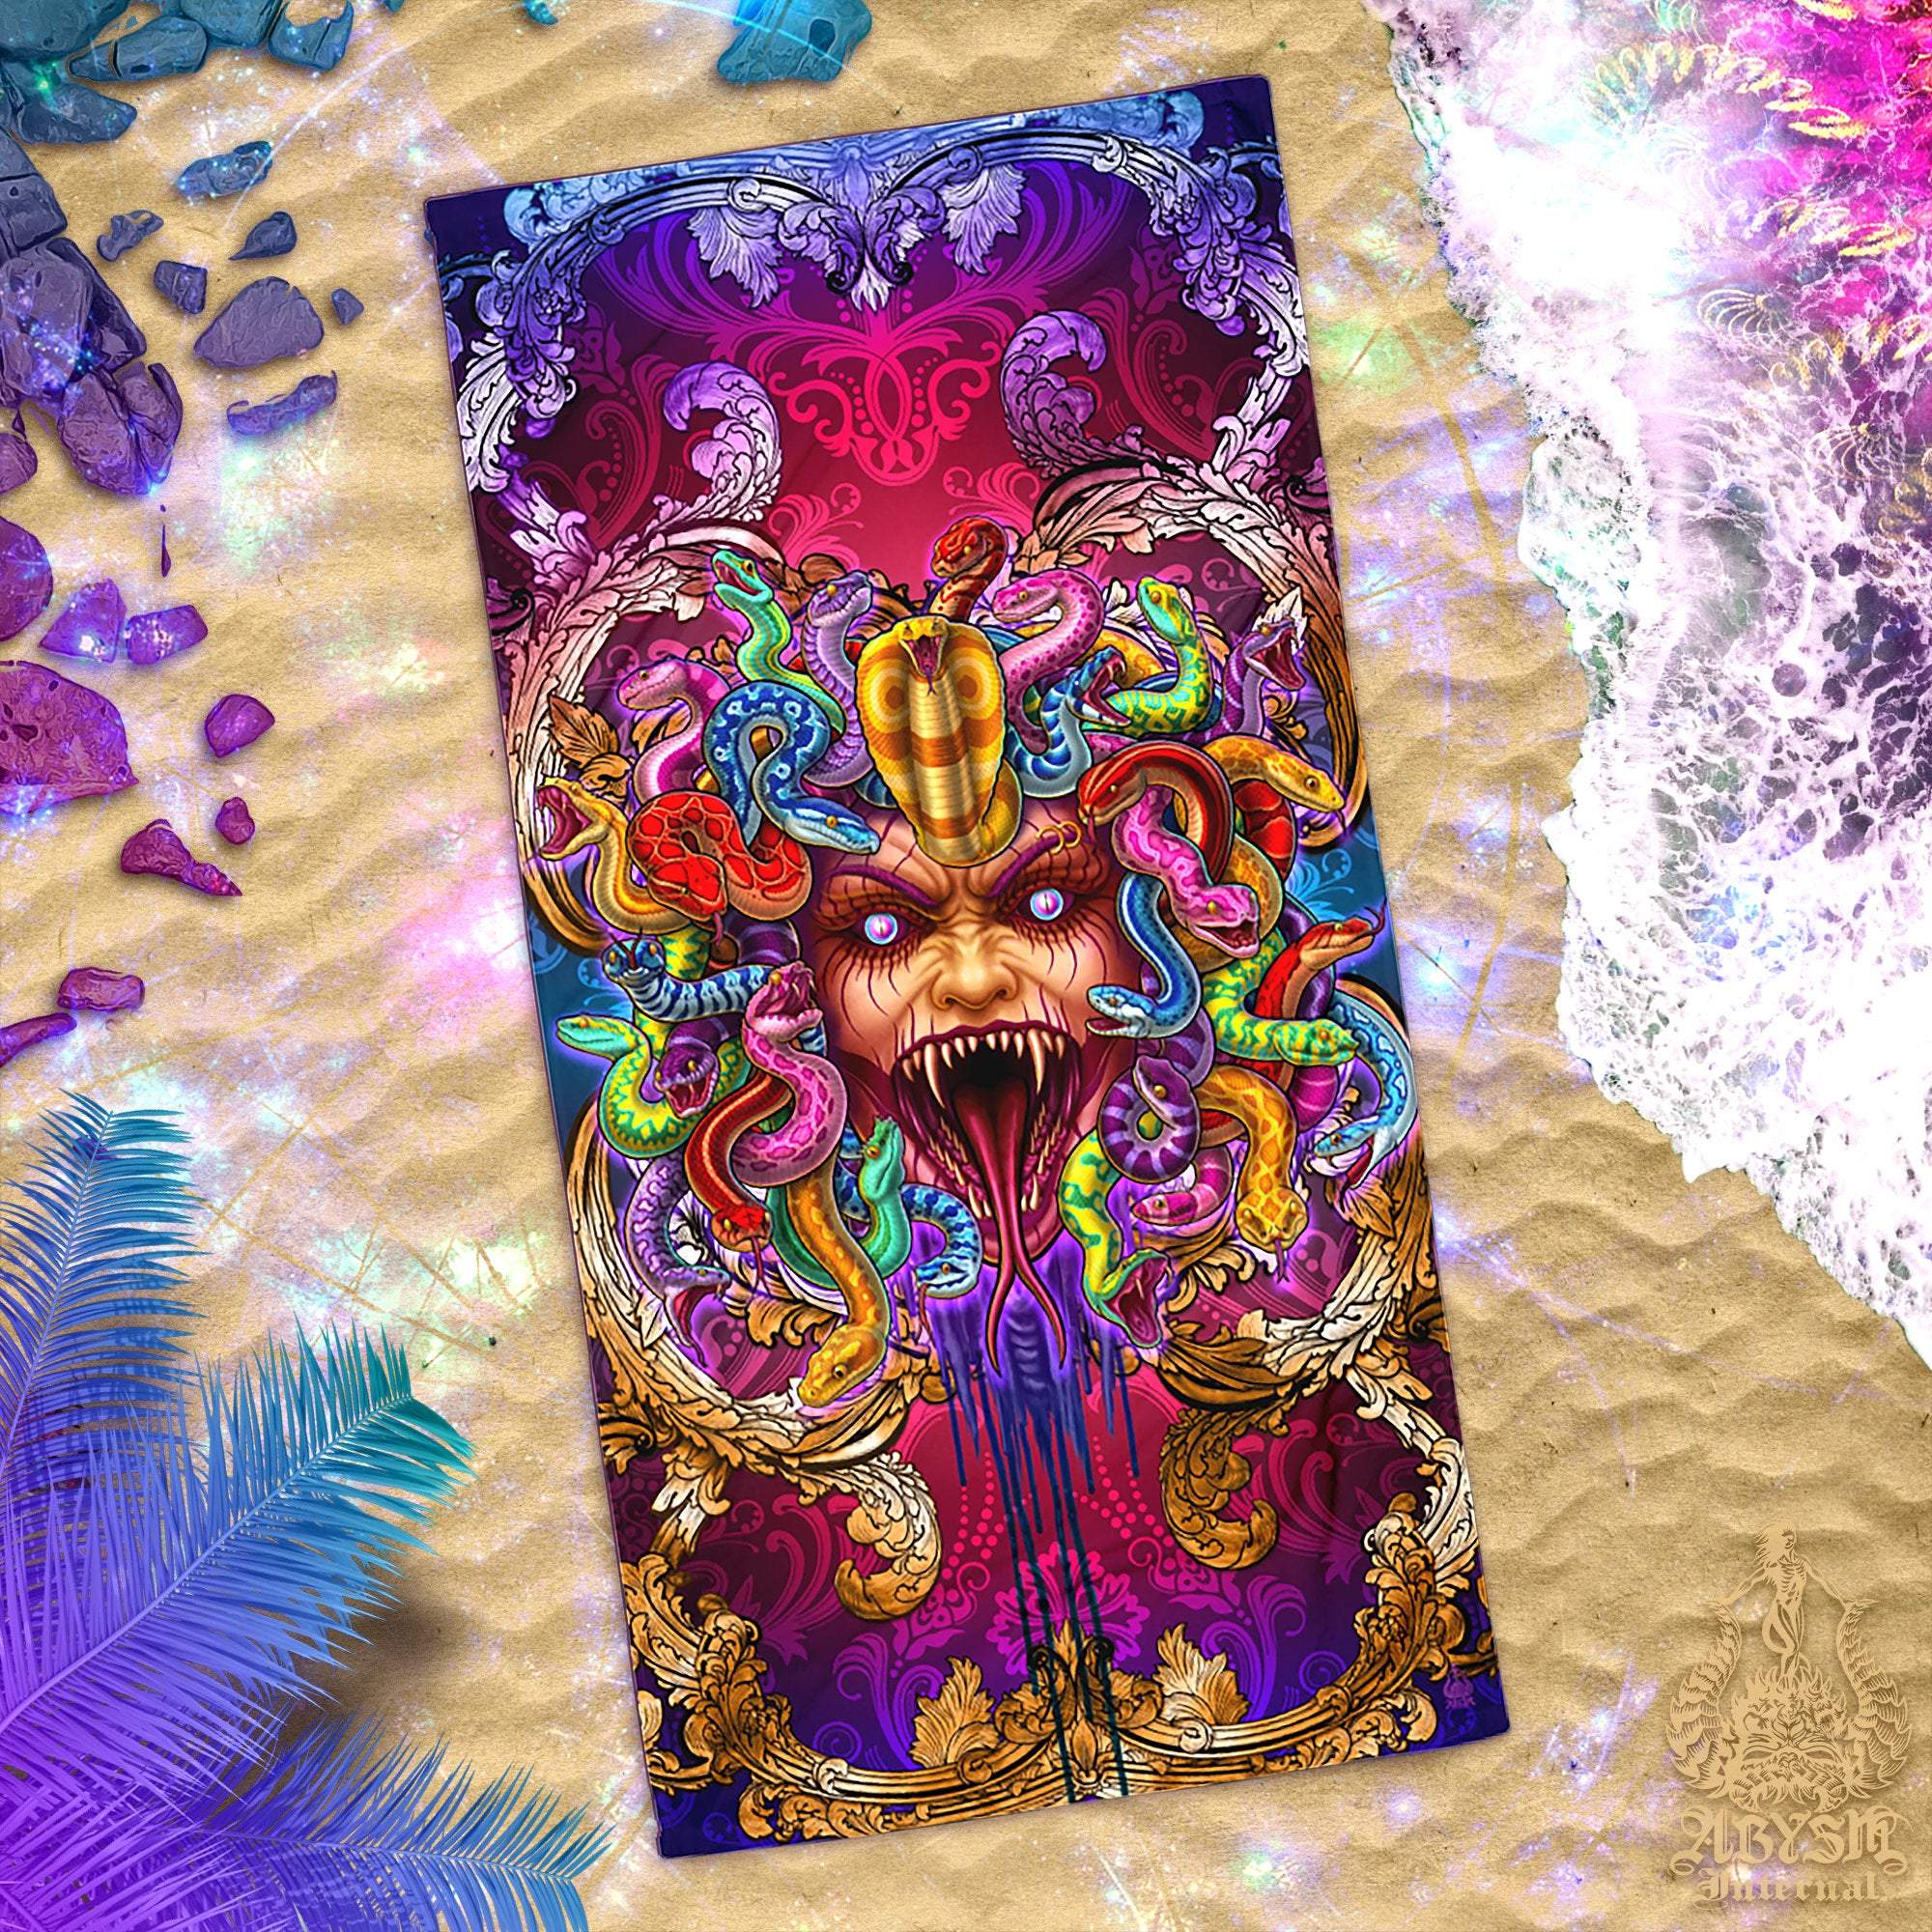 Psychedelic Beach Towel, Psy Medusa, Cool Gift Idea for Gamer Art, Rave Snakes - Abysm Internal